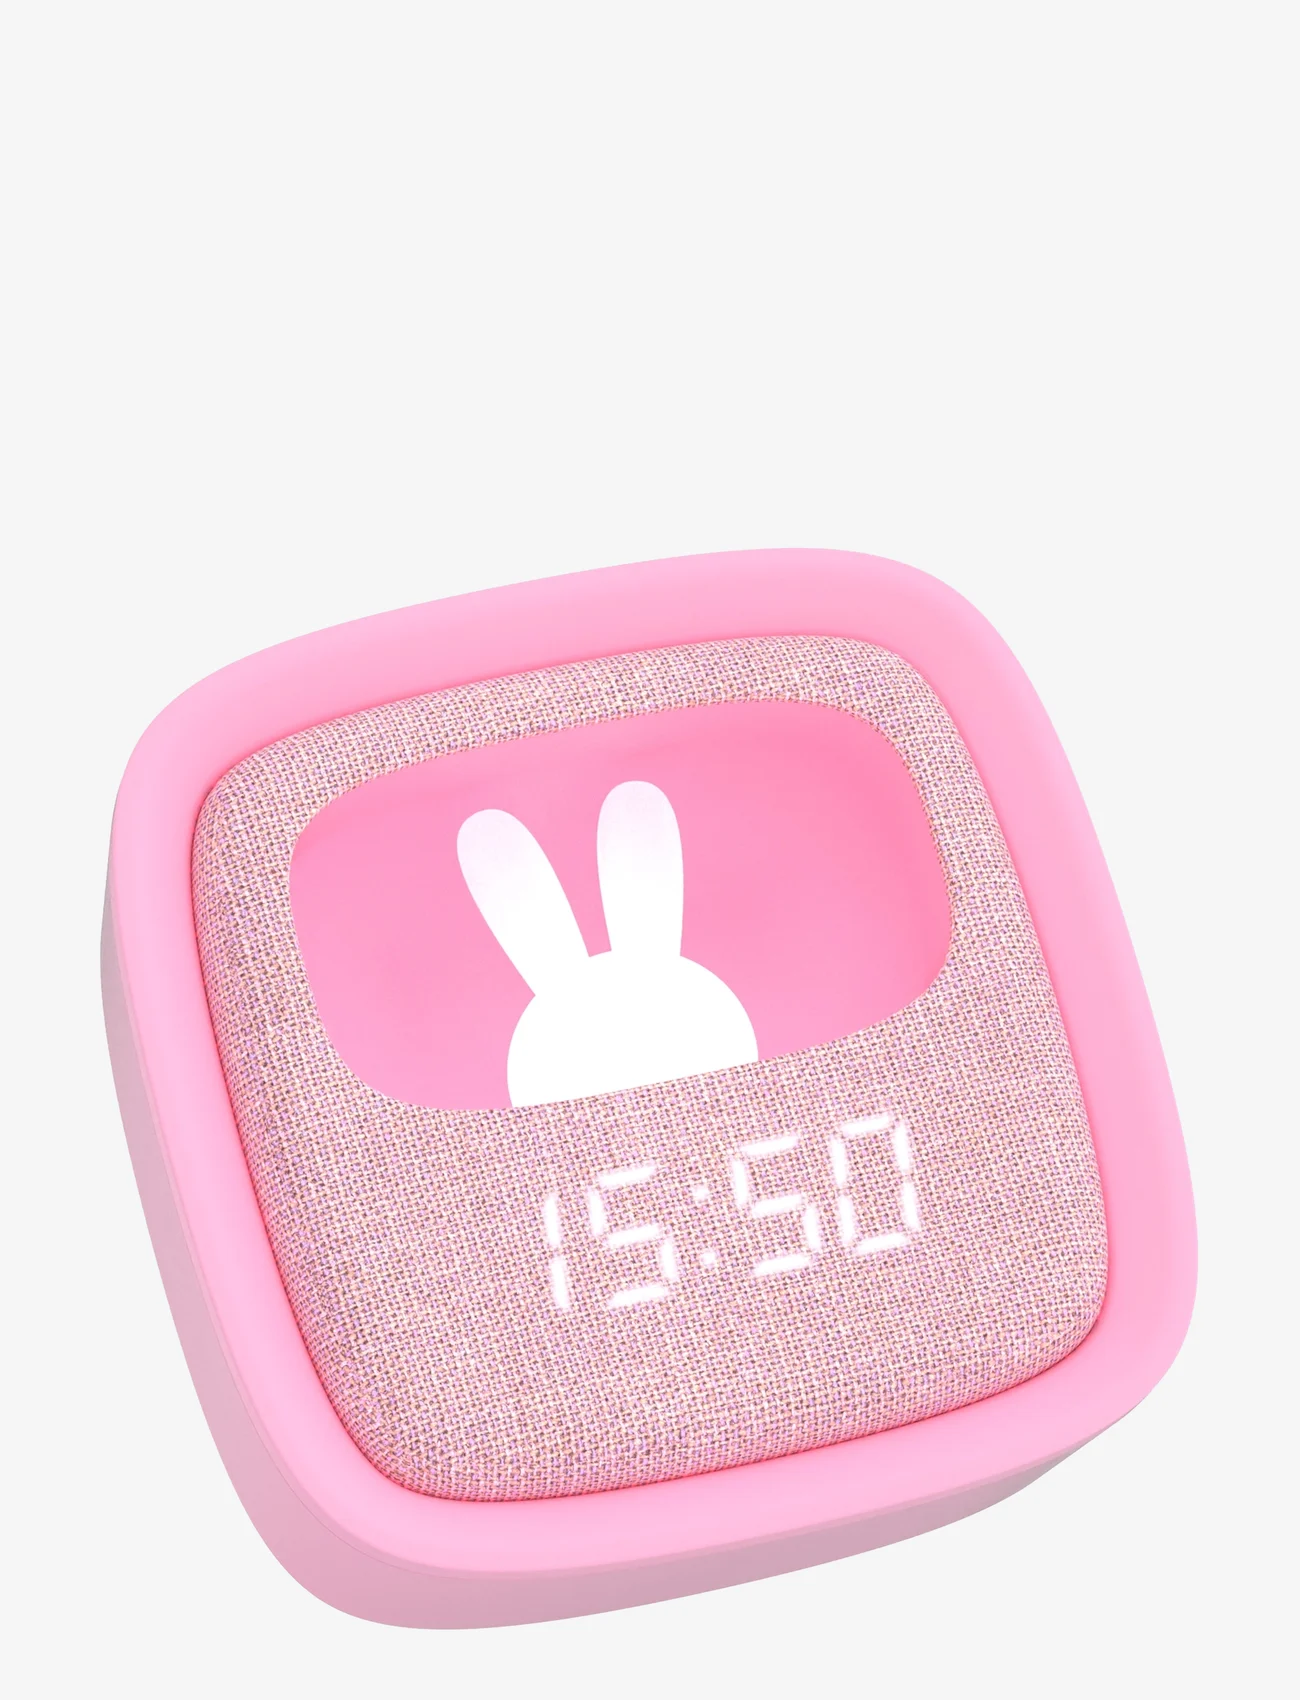 Mobility On Board - Billy Clock and light - die niedrigsten preise - marshmallow - 0